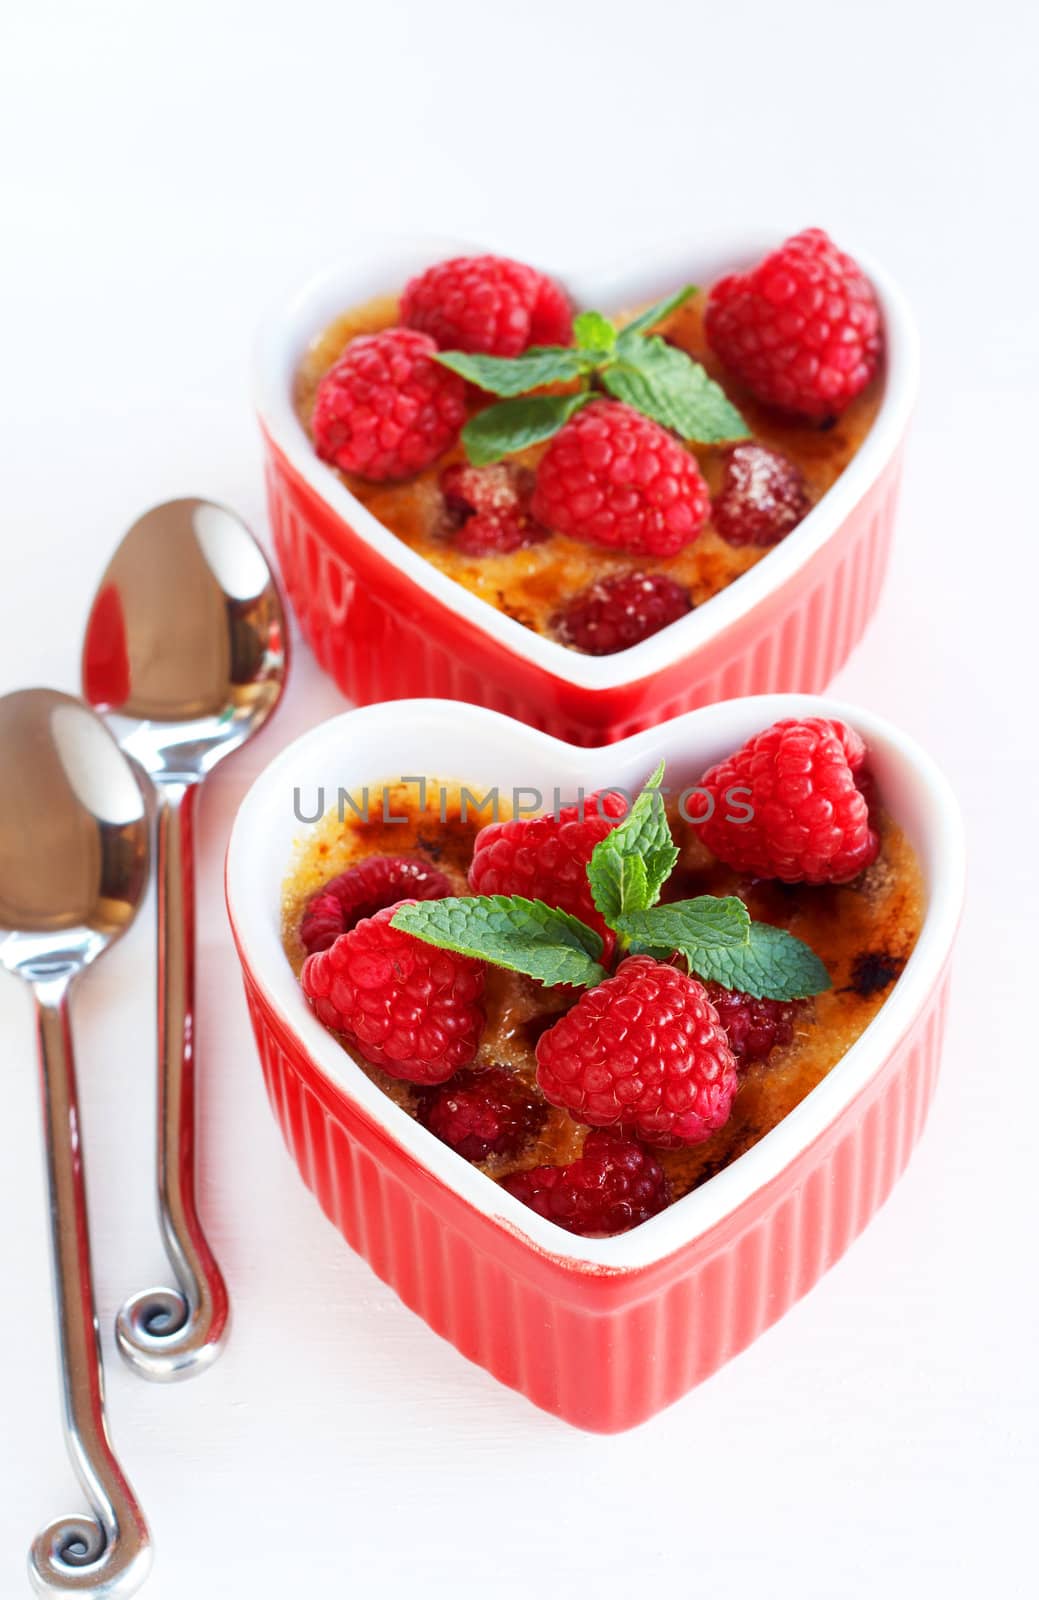 French creme brulee dessert with raspberries and mint covered with caramelized sugar in red heart shaped ramekins on white background